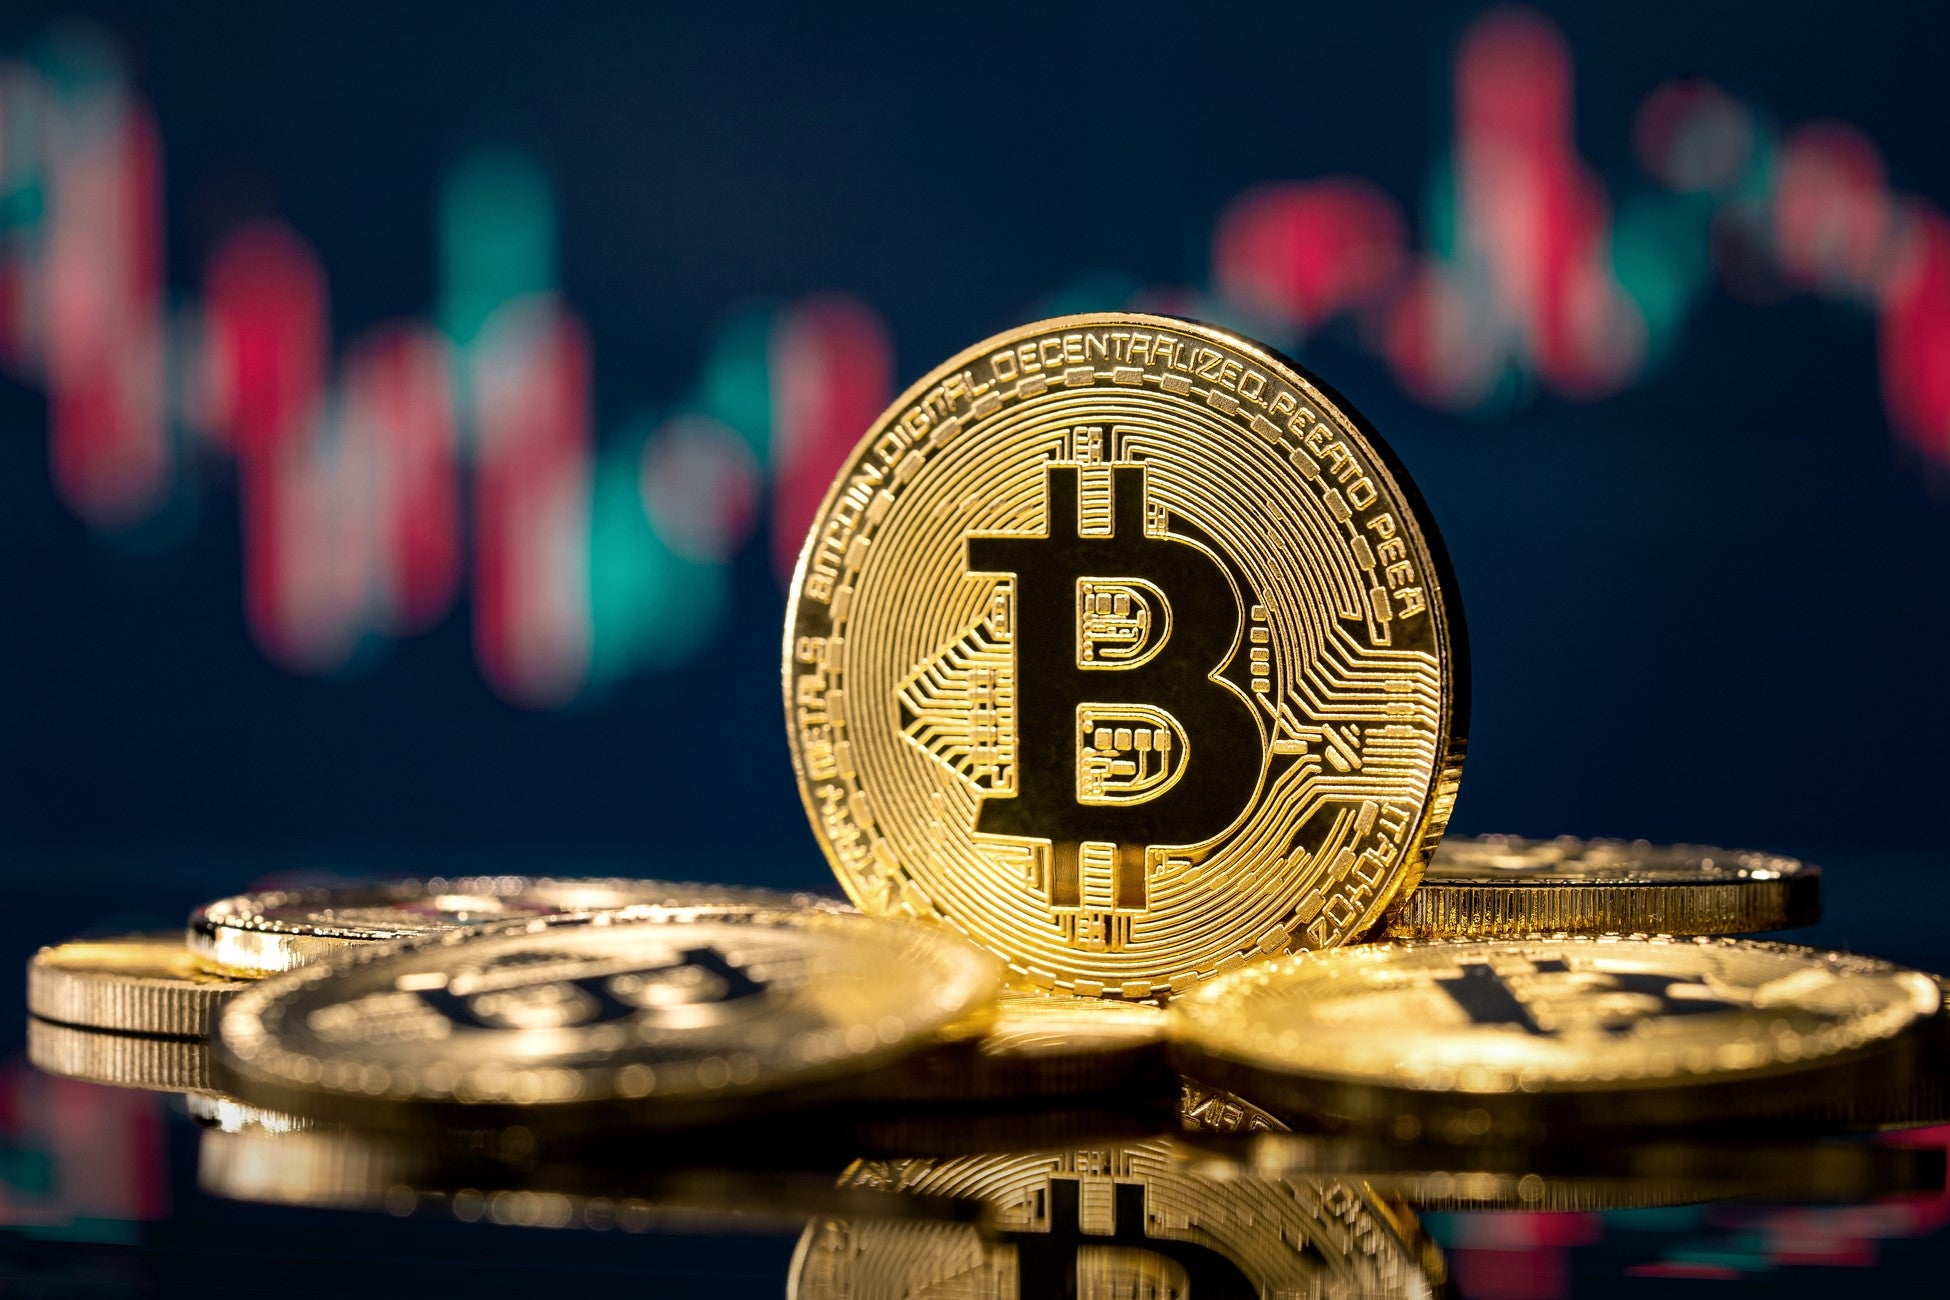 The price of bitcoin rose more than 200 per cent between February 2023 and February 2024